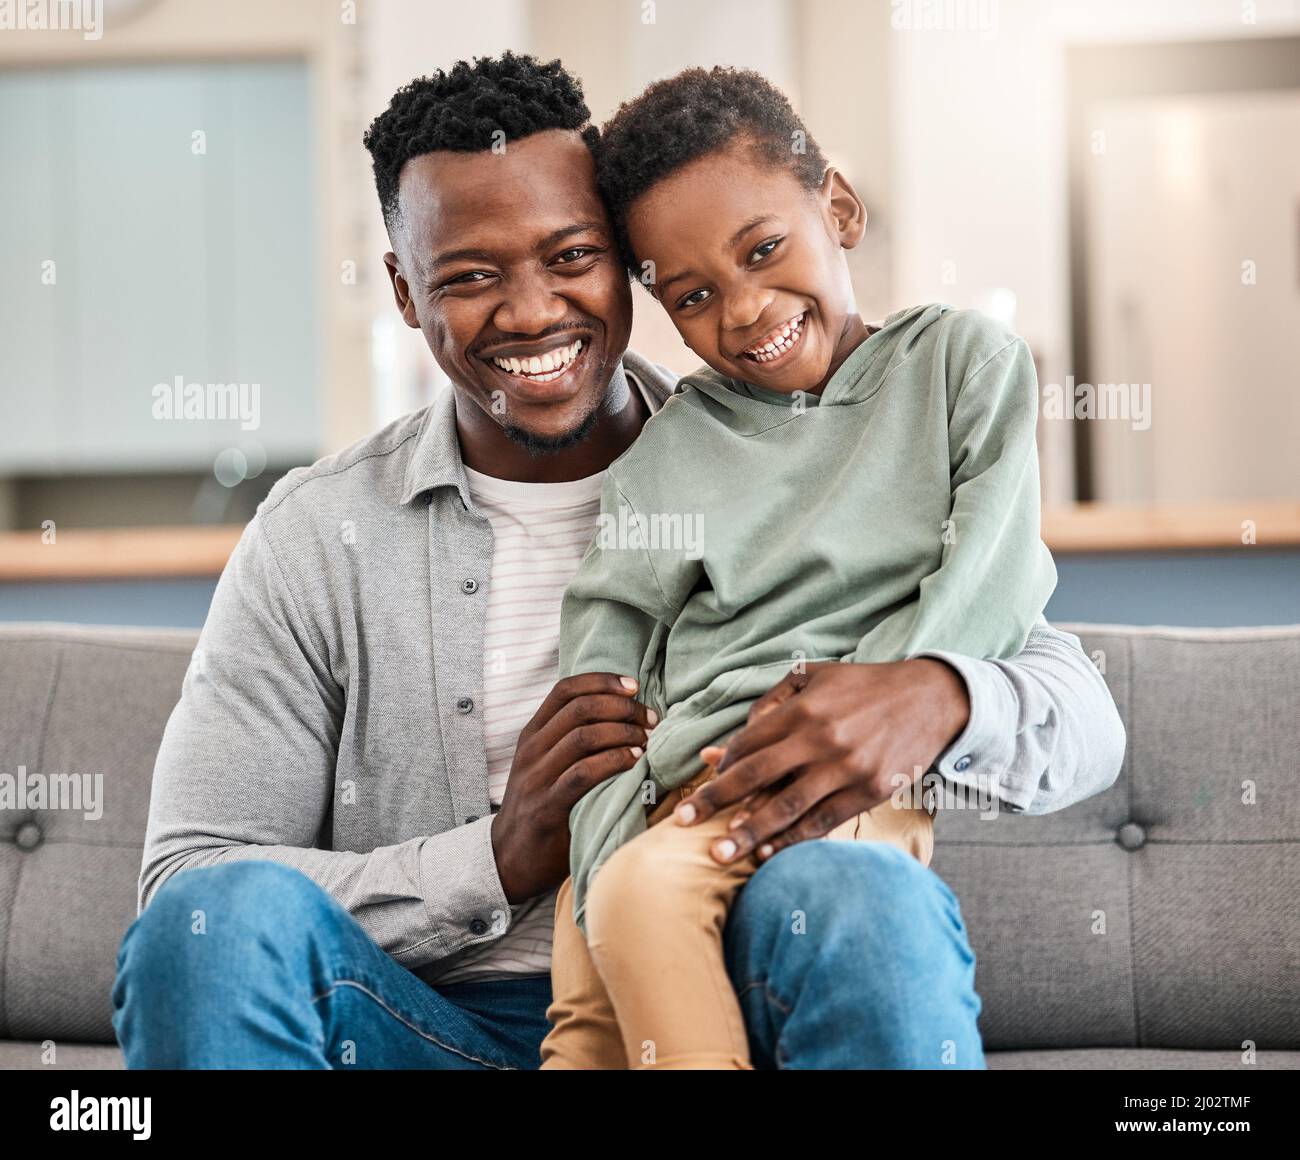 Nothing fosters security than kids who feel loved. Shot of an adorable little boy spending quality time with his father on the sofa at home. Stock Photo